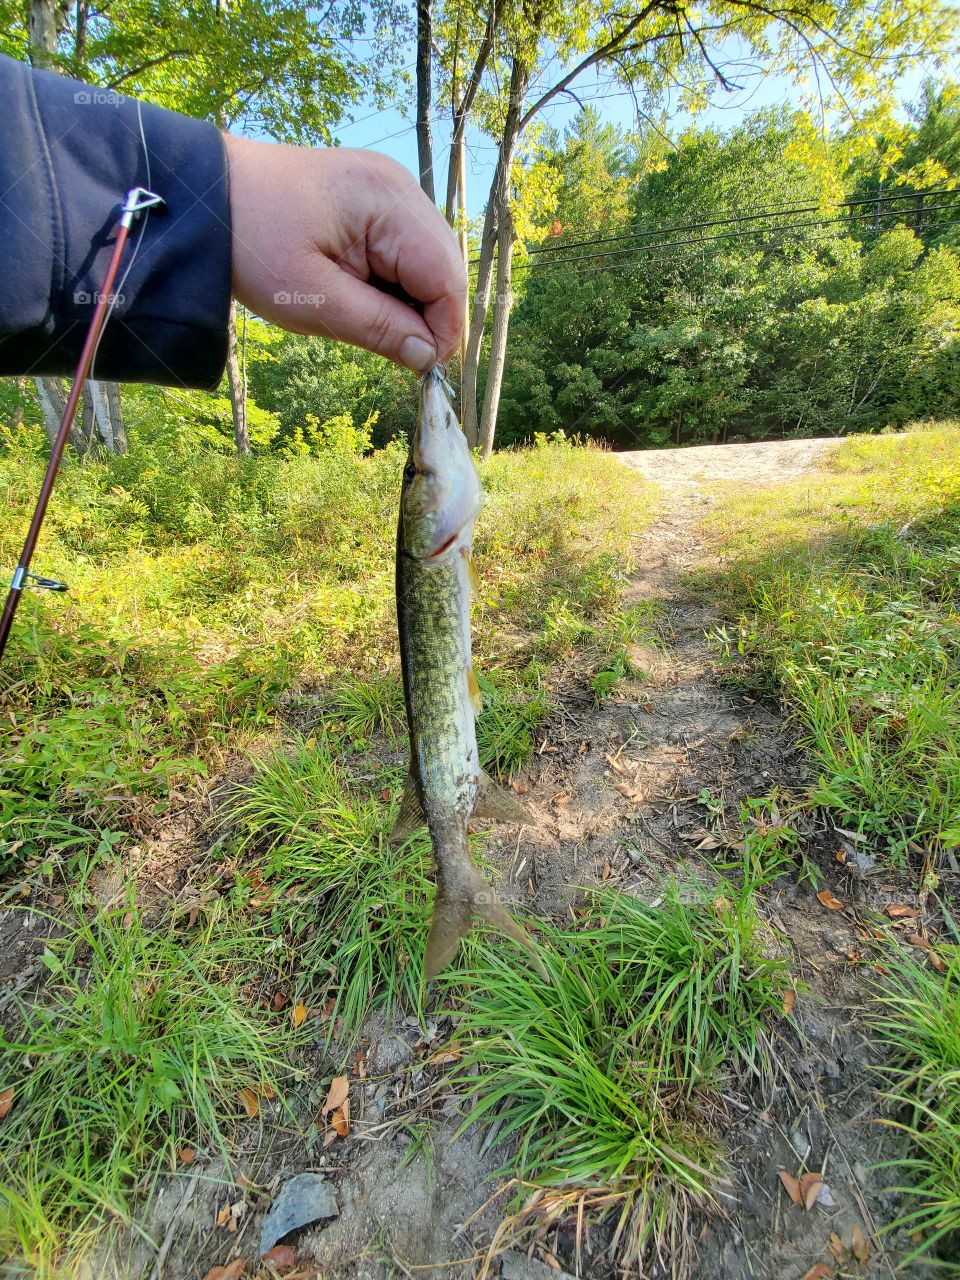 pickerel caught from the river, rumford maine